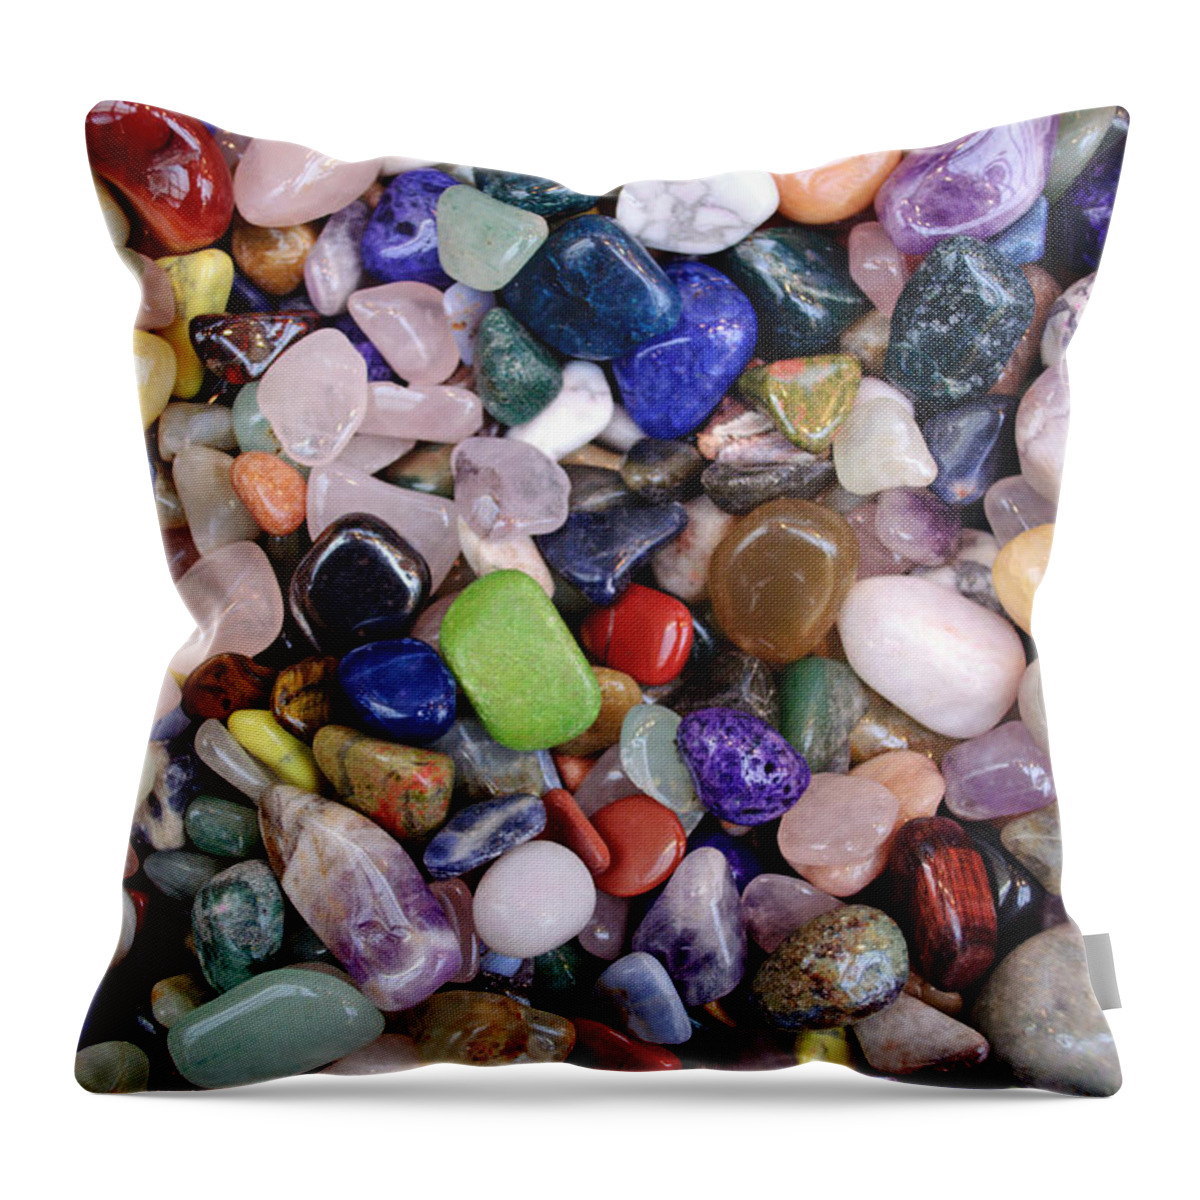 Gem Throw Pillow featuring the photograph Polished Gemstones by Tikvah's Hope